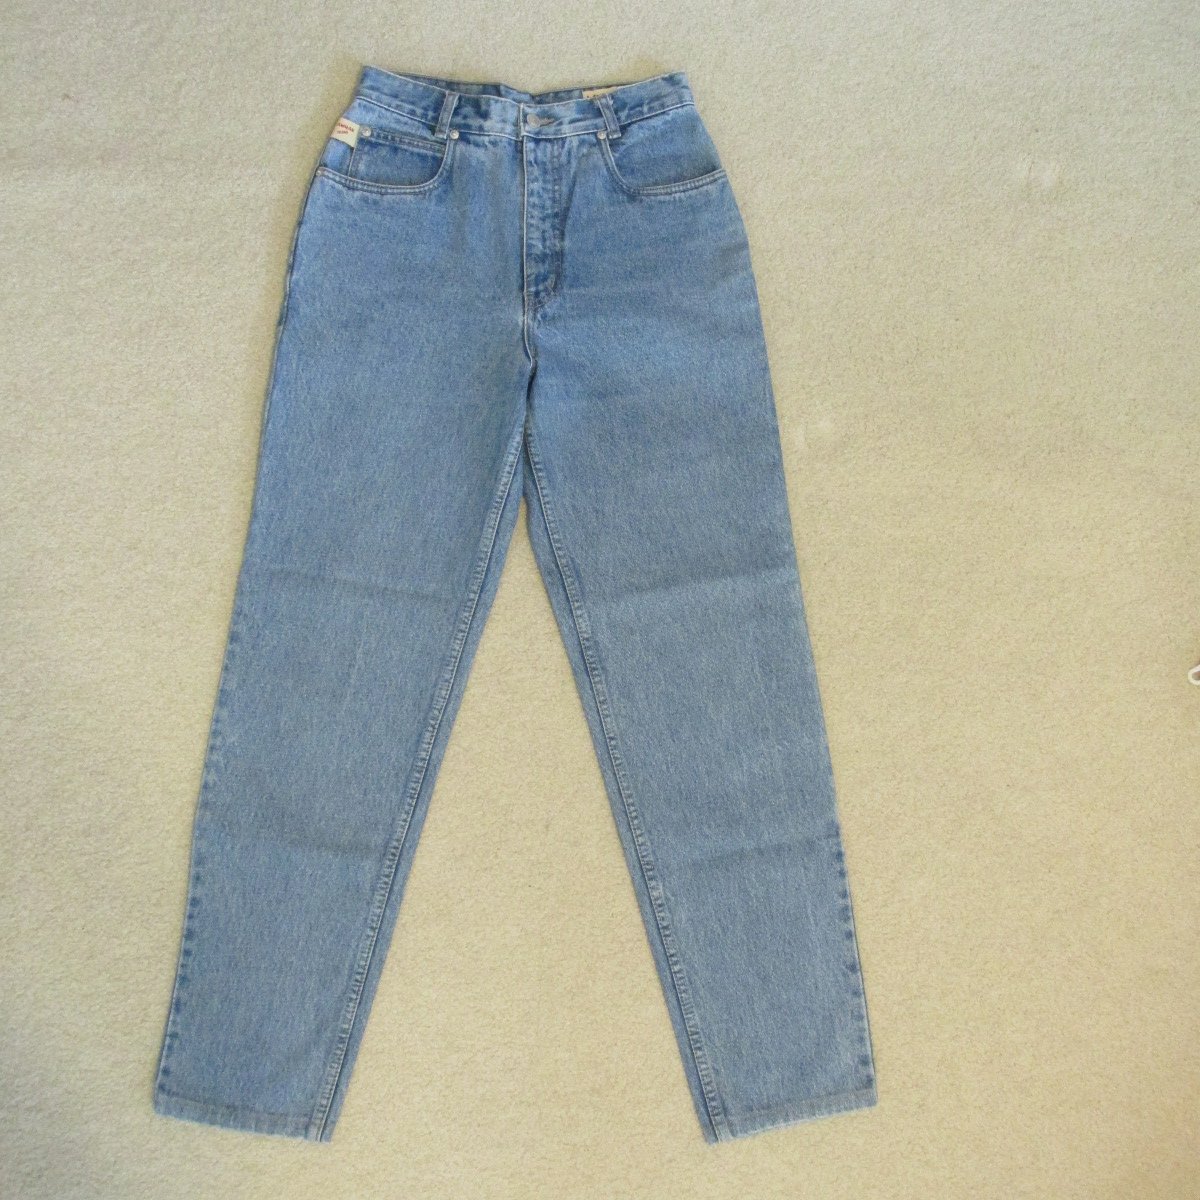 LAWMAN WOMEN'S JUNIOR'S SIZE 9 JEANS STONE WASHED TAPERED LEG MOM HIGH ...